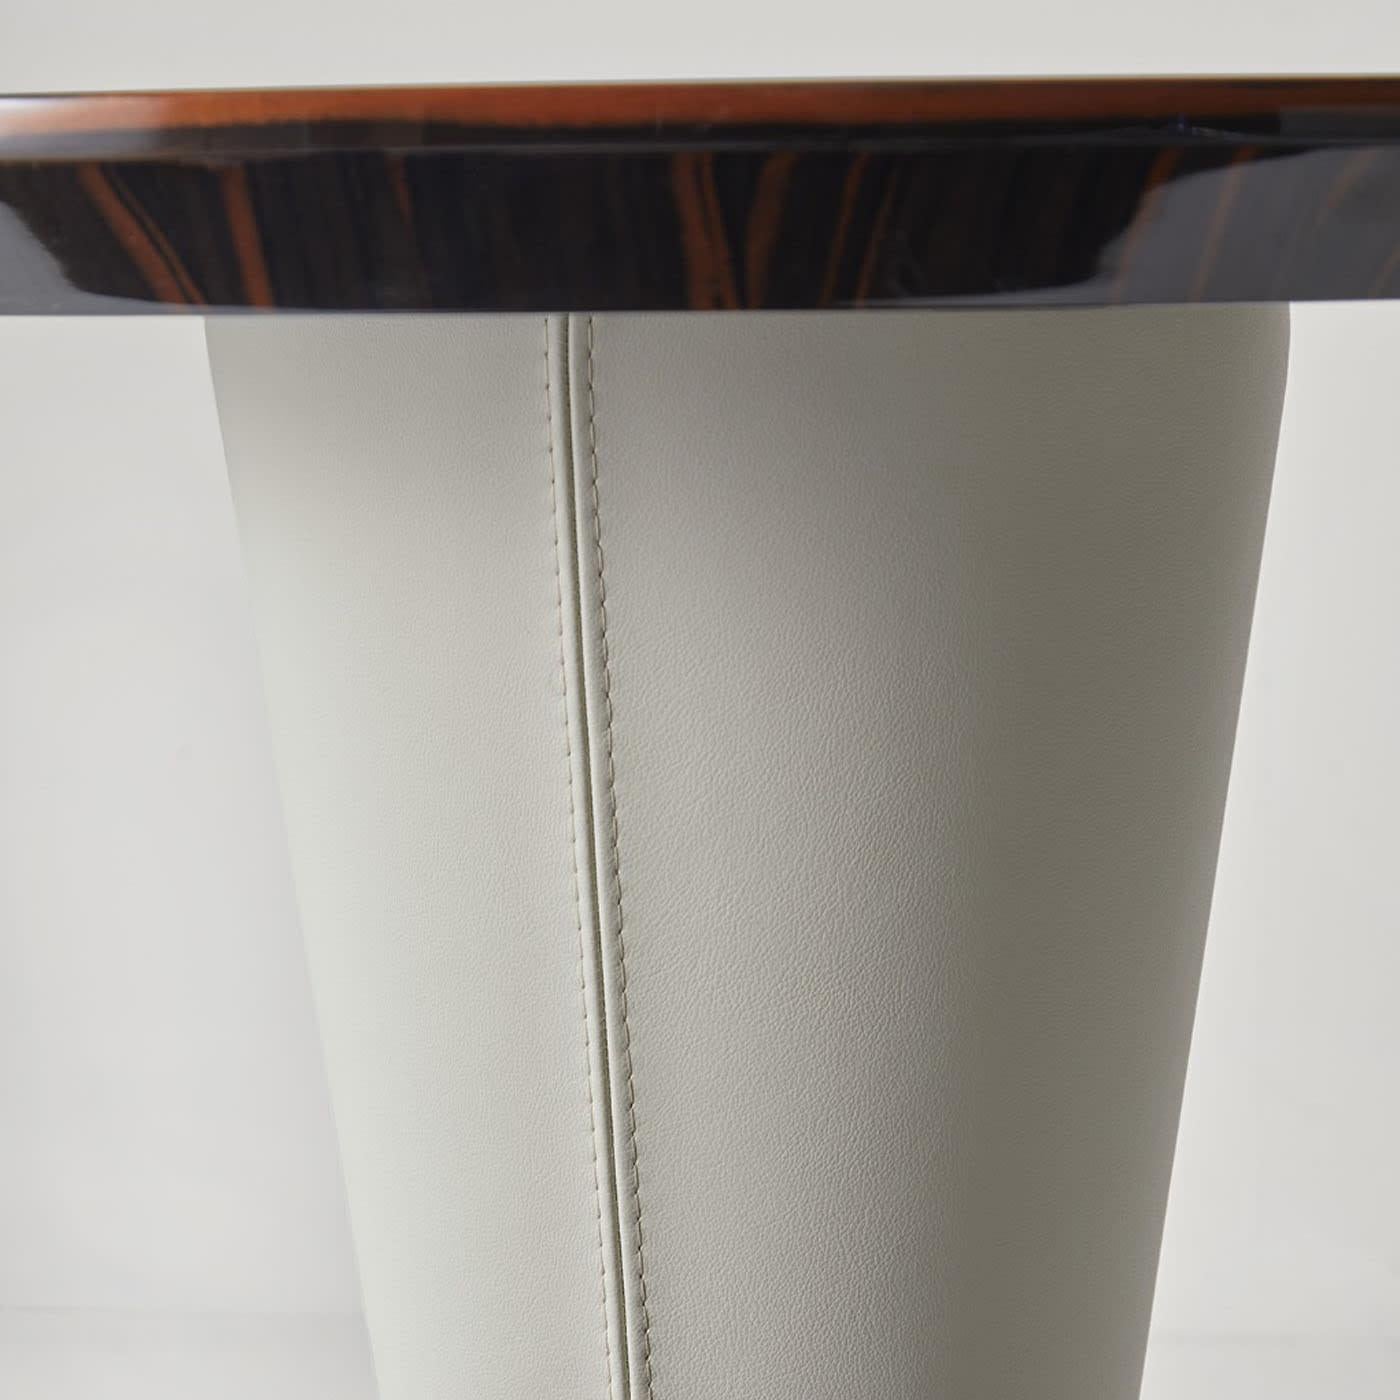 Rocchetto round side table with Ebano Macasar polished wooden top and padded leg in leather. A small jewel of all-Italian manufacturing.